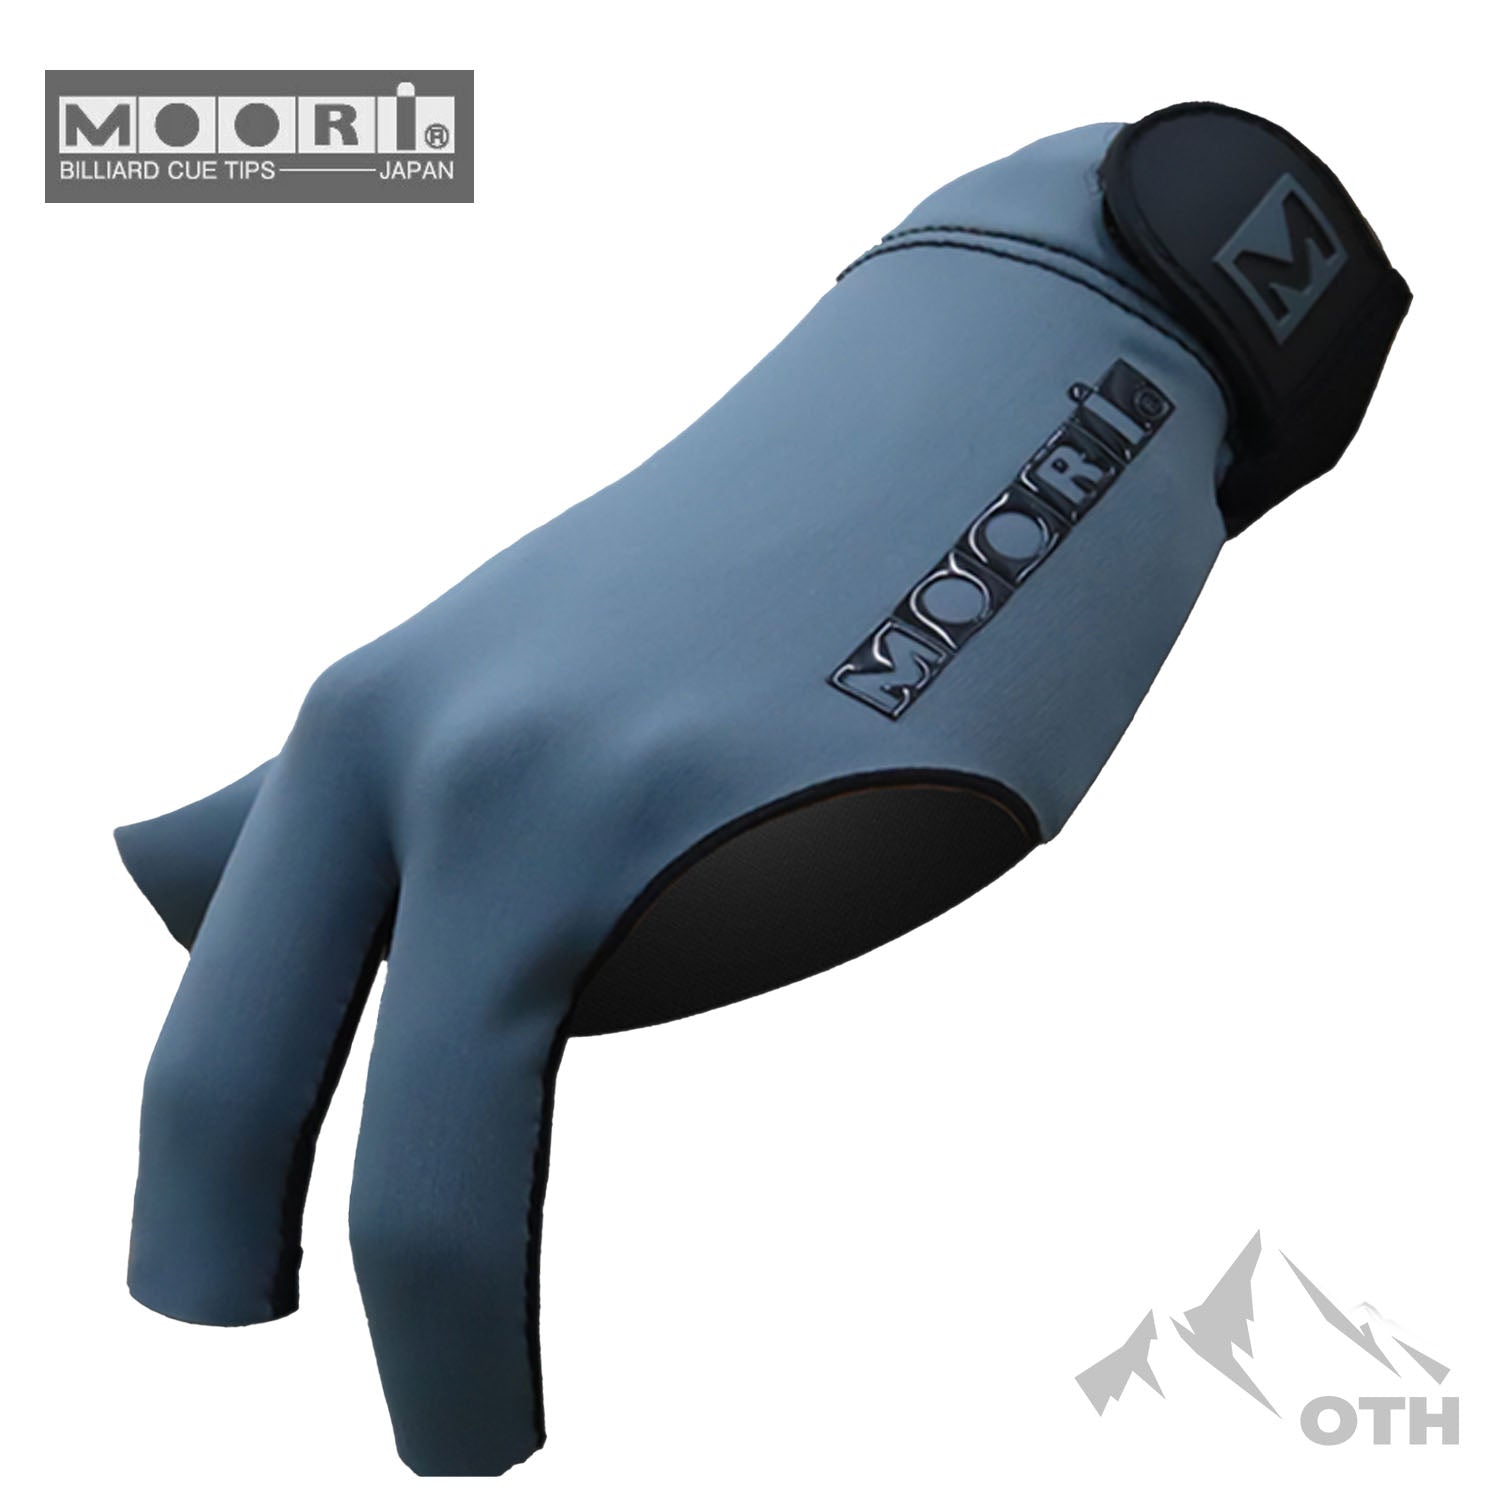 Moori Tips: Introducing our extraordinary Billiard Glove – Its strong wrinkle resistance ensures a sleek appearance, while the strategic silicone pad enhances stability for precise shots. With ultra-breathable mesh, this versatile glove keeps you cool and focused, whether you're a professional or amateur player*strong wrinkle-resistance*silicone*stability*ultra-breathable mesh